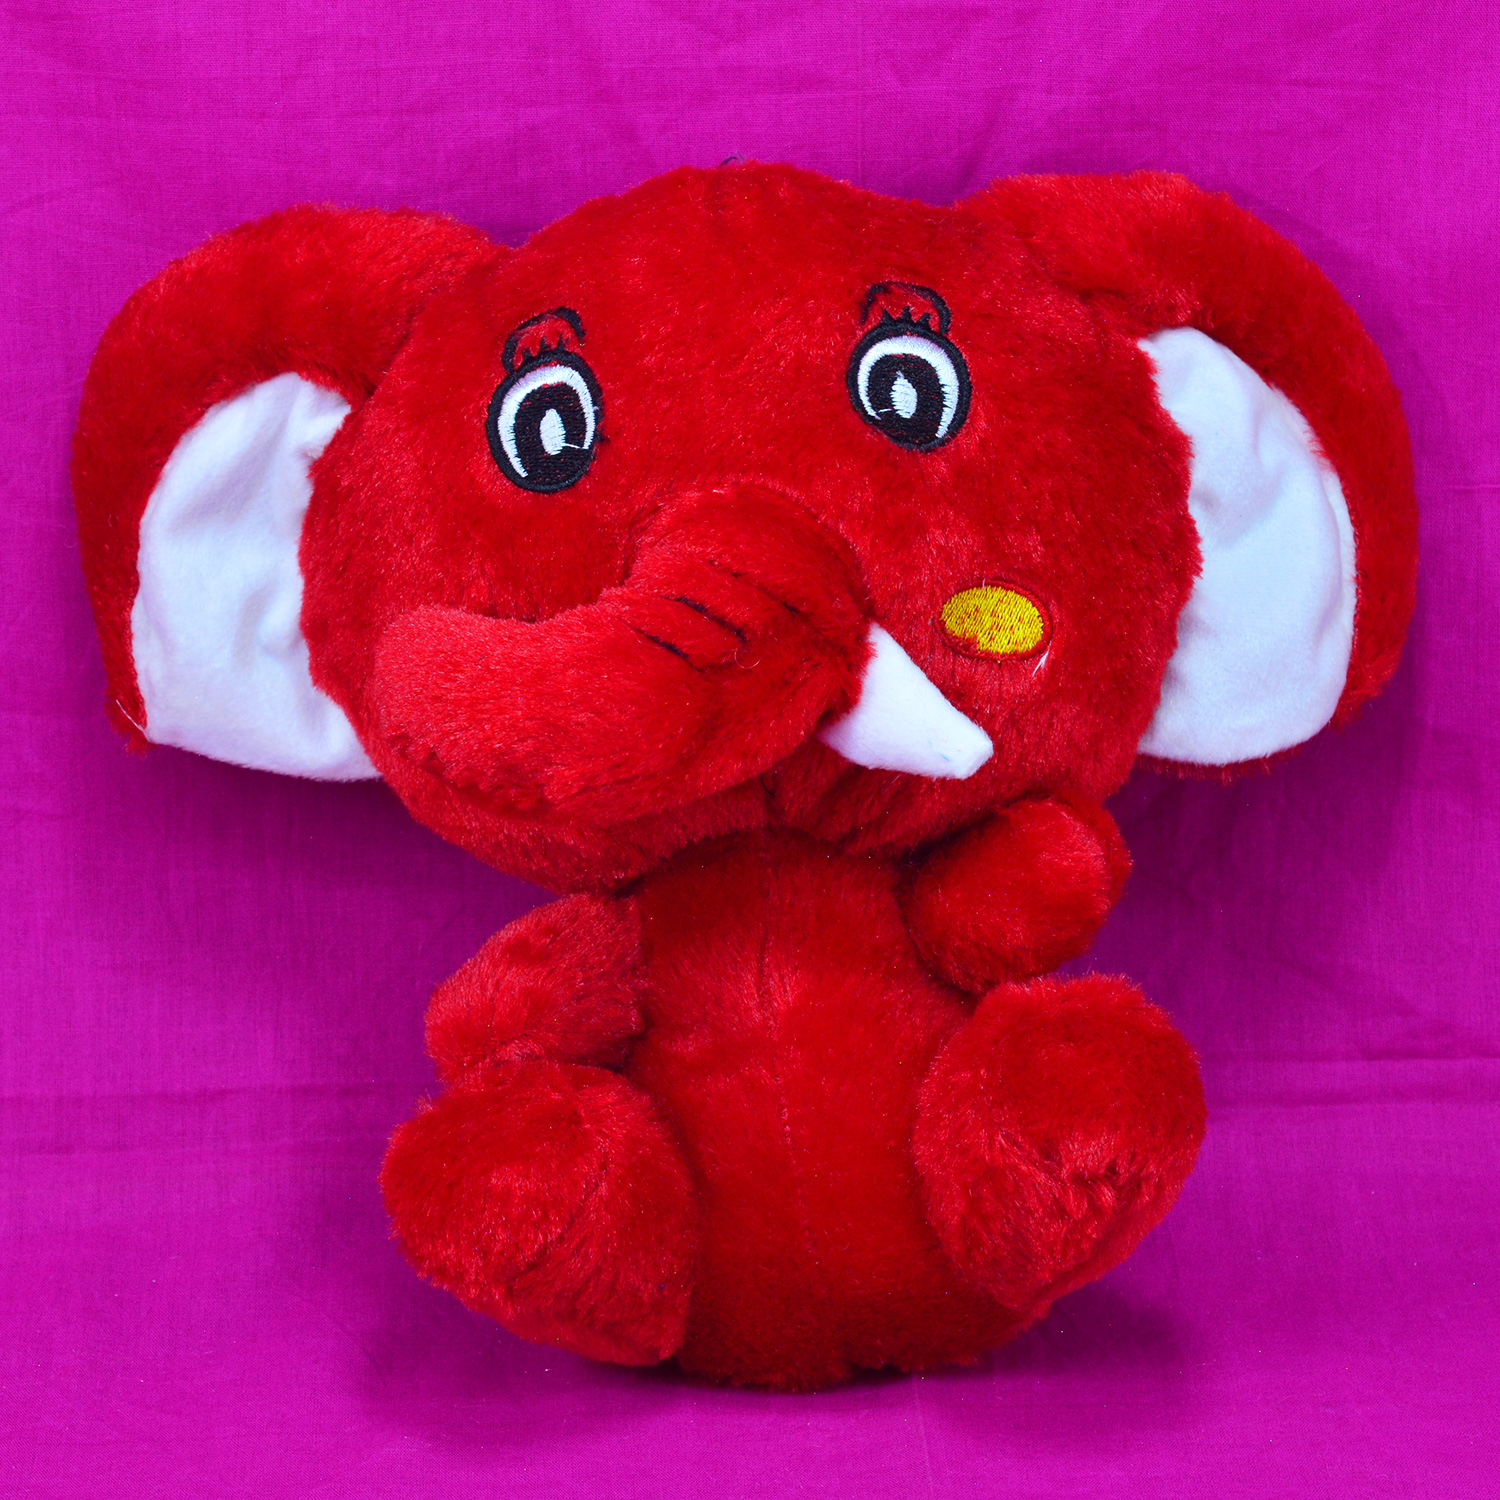 Buy or send Red Color Cute Cartoon Hathi or Elephant Soft Toy for Kids  Online